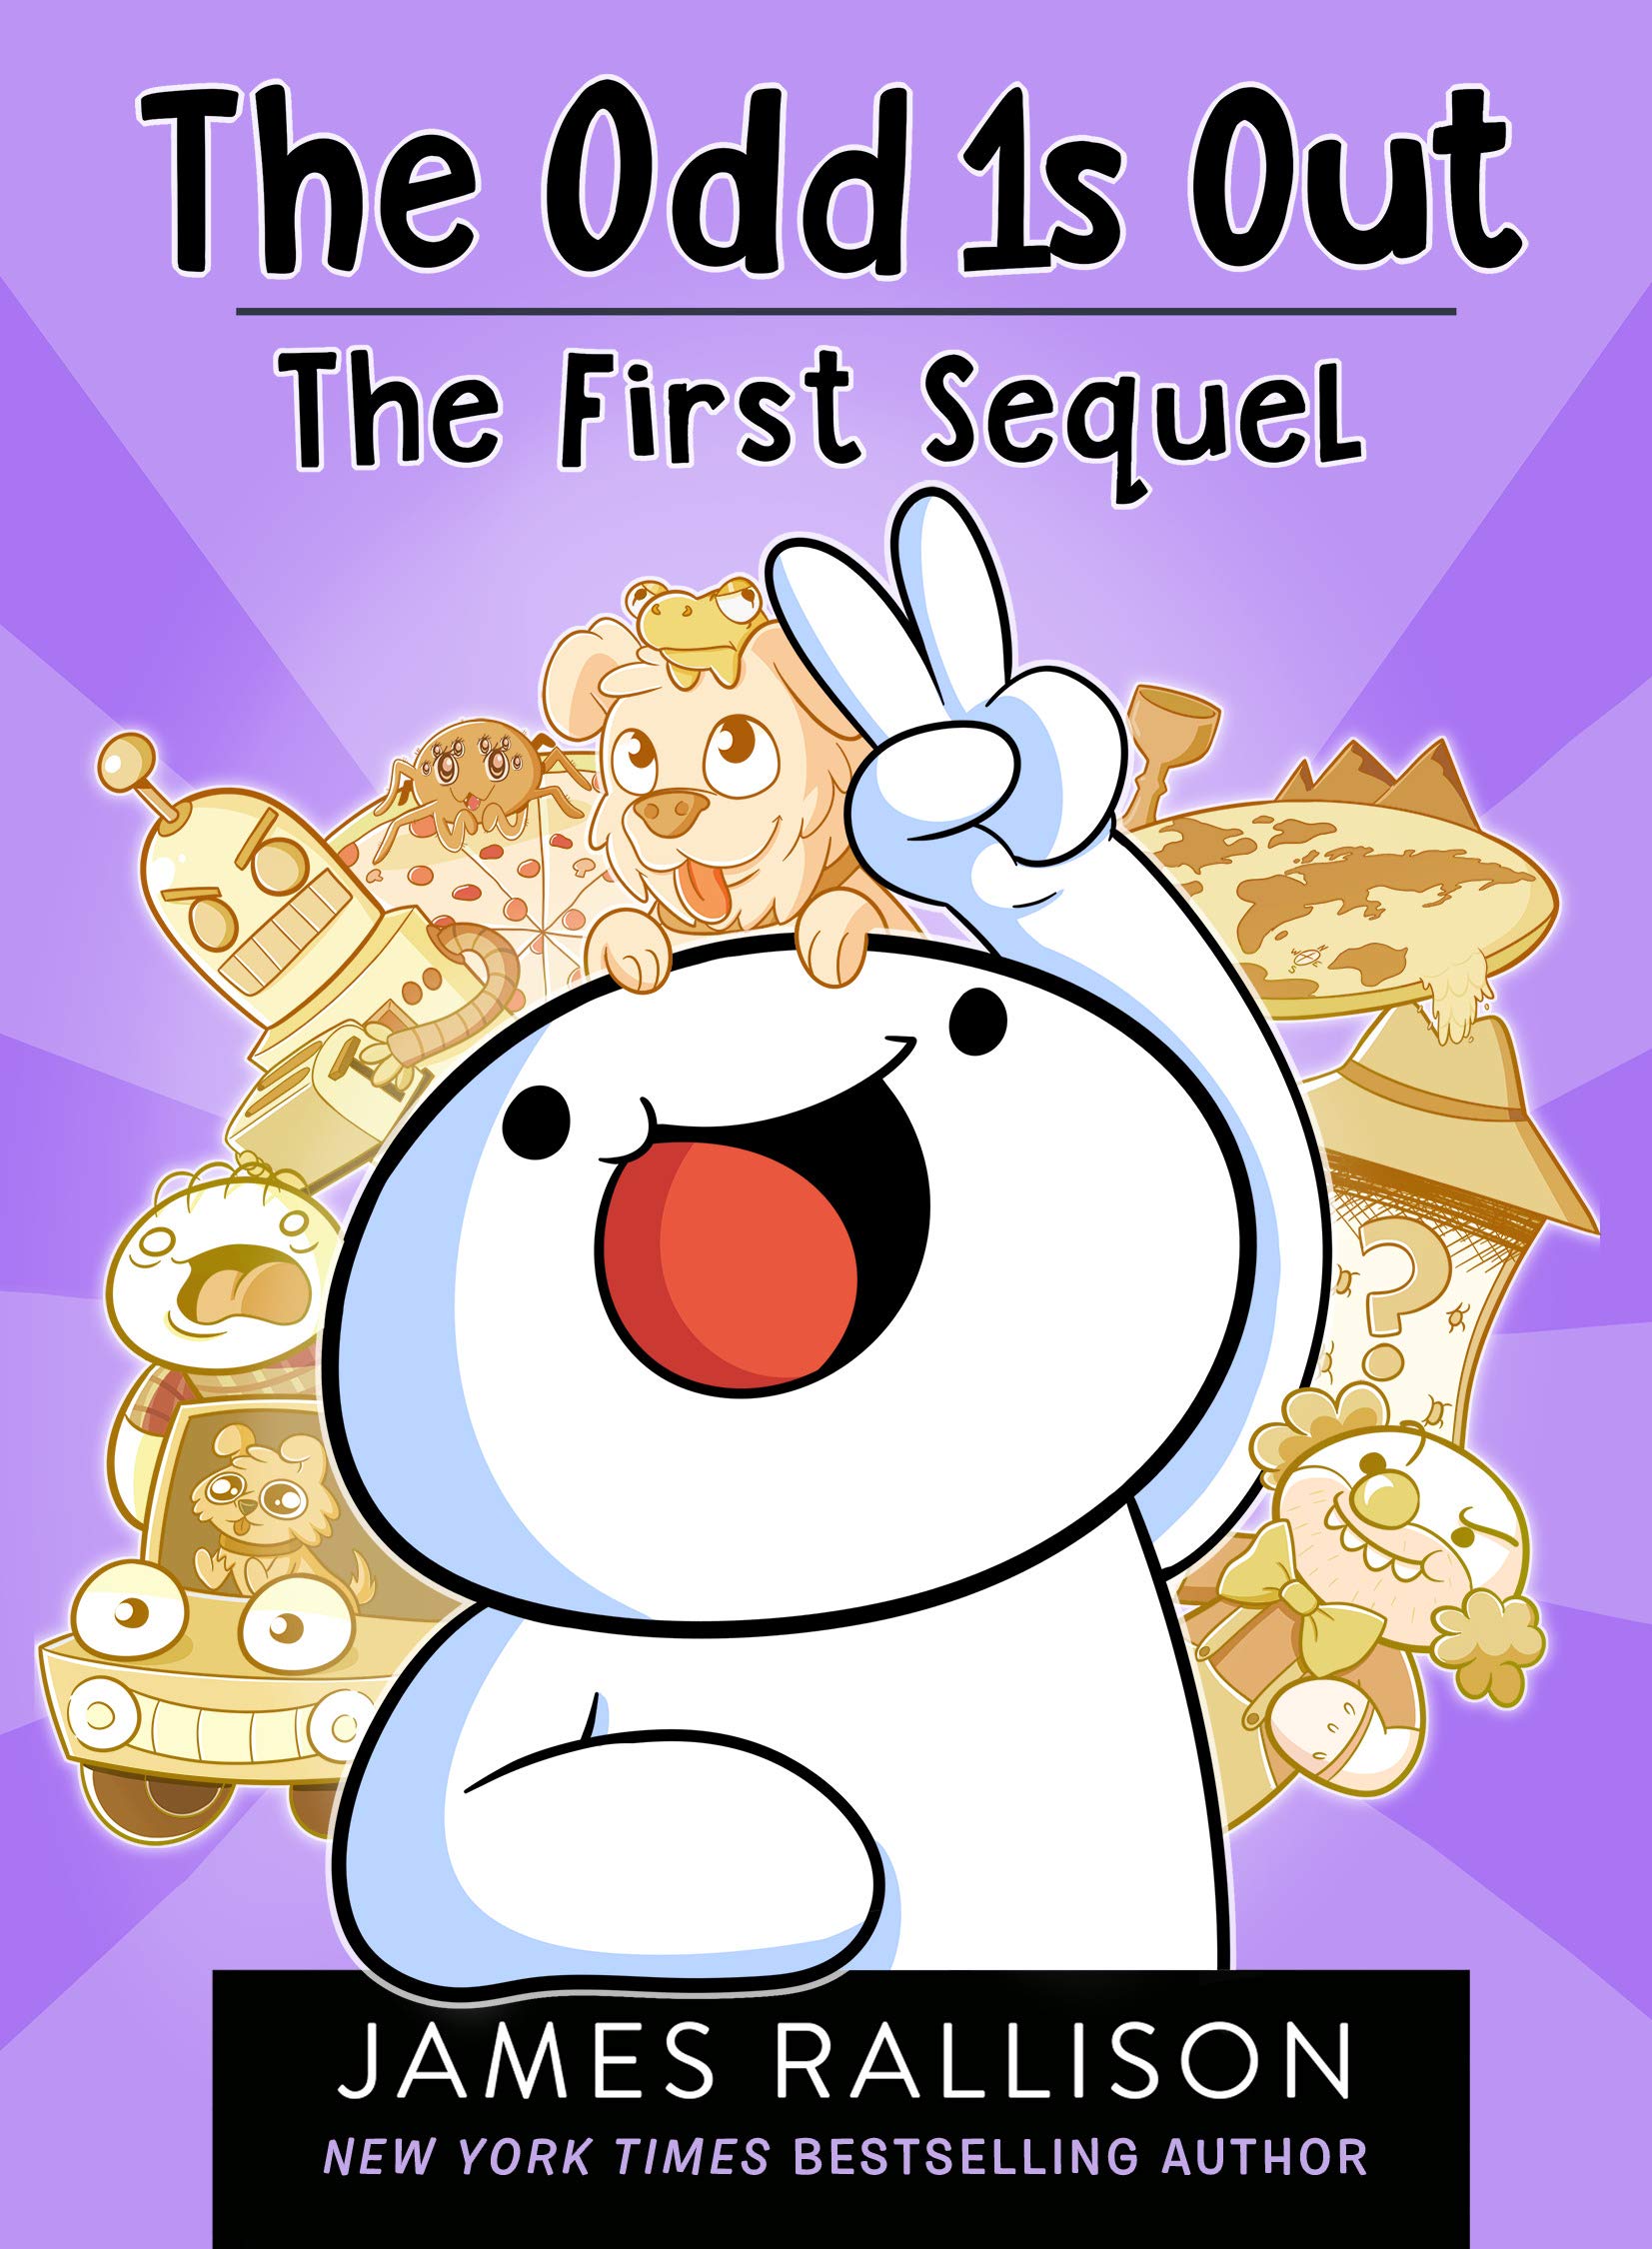 The Odd 1s Out The First Sequel Theodd1sout Wiki Fandom